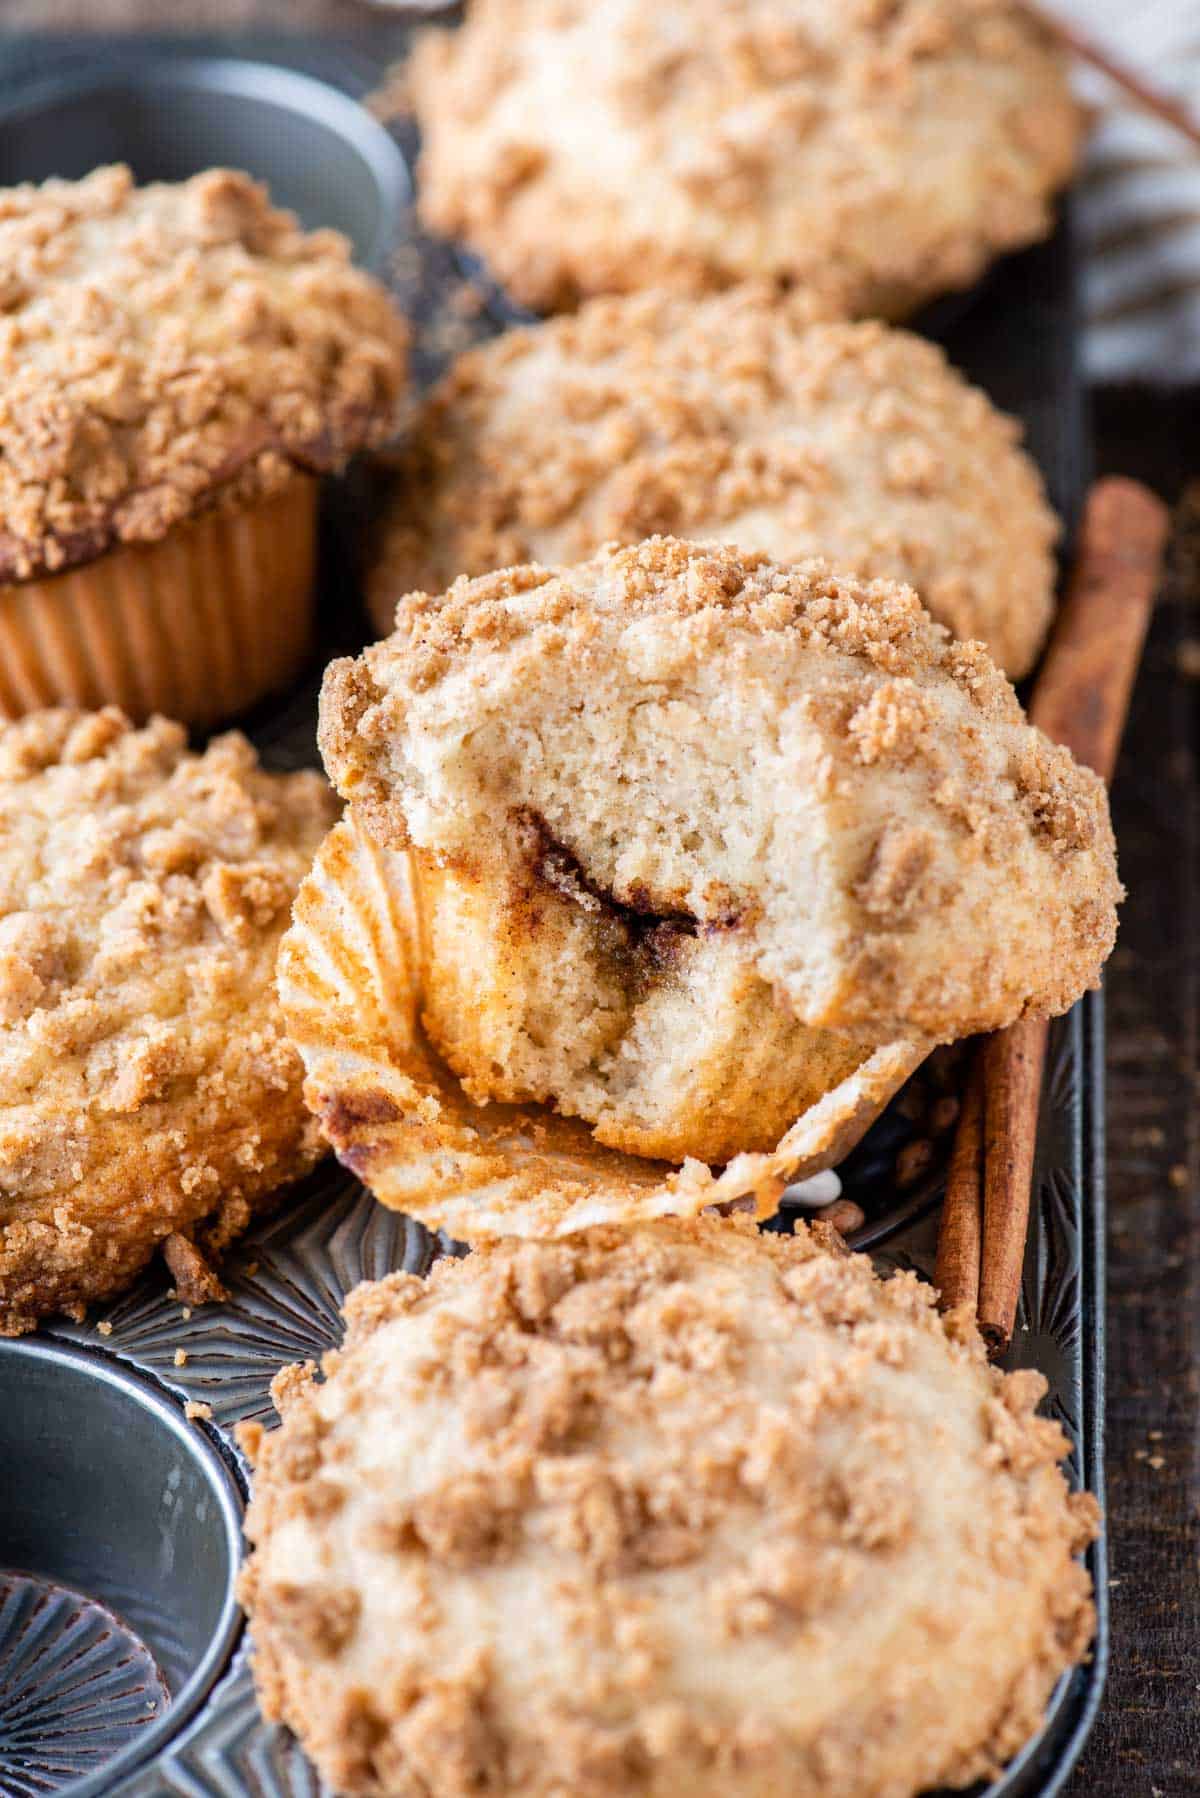 coffee cake muffins with bite removed showing cinnamon swirl layer inside on metal muffin pan